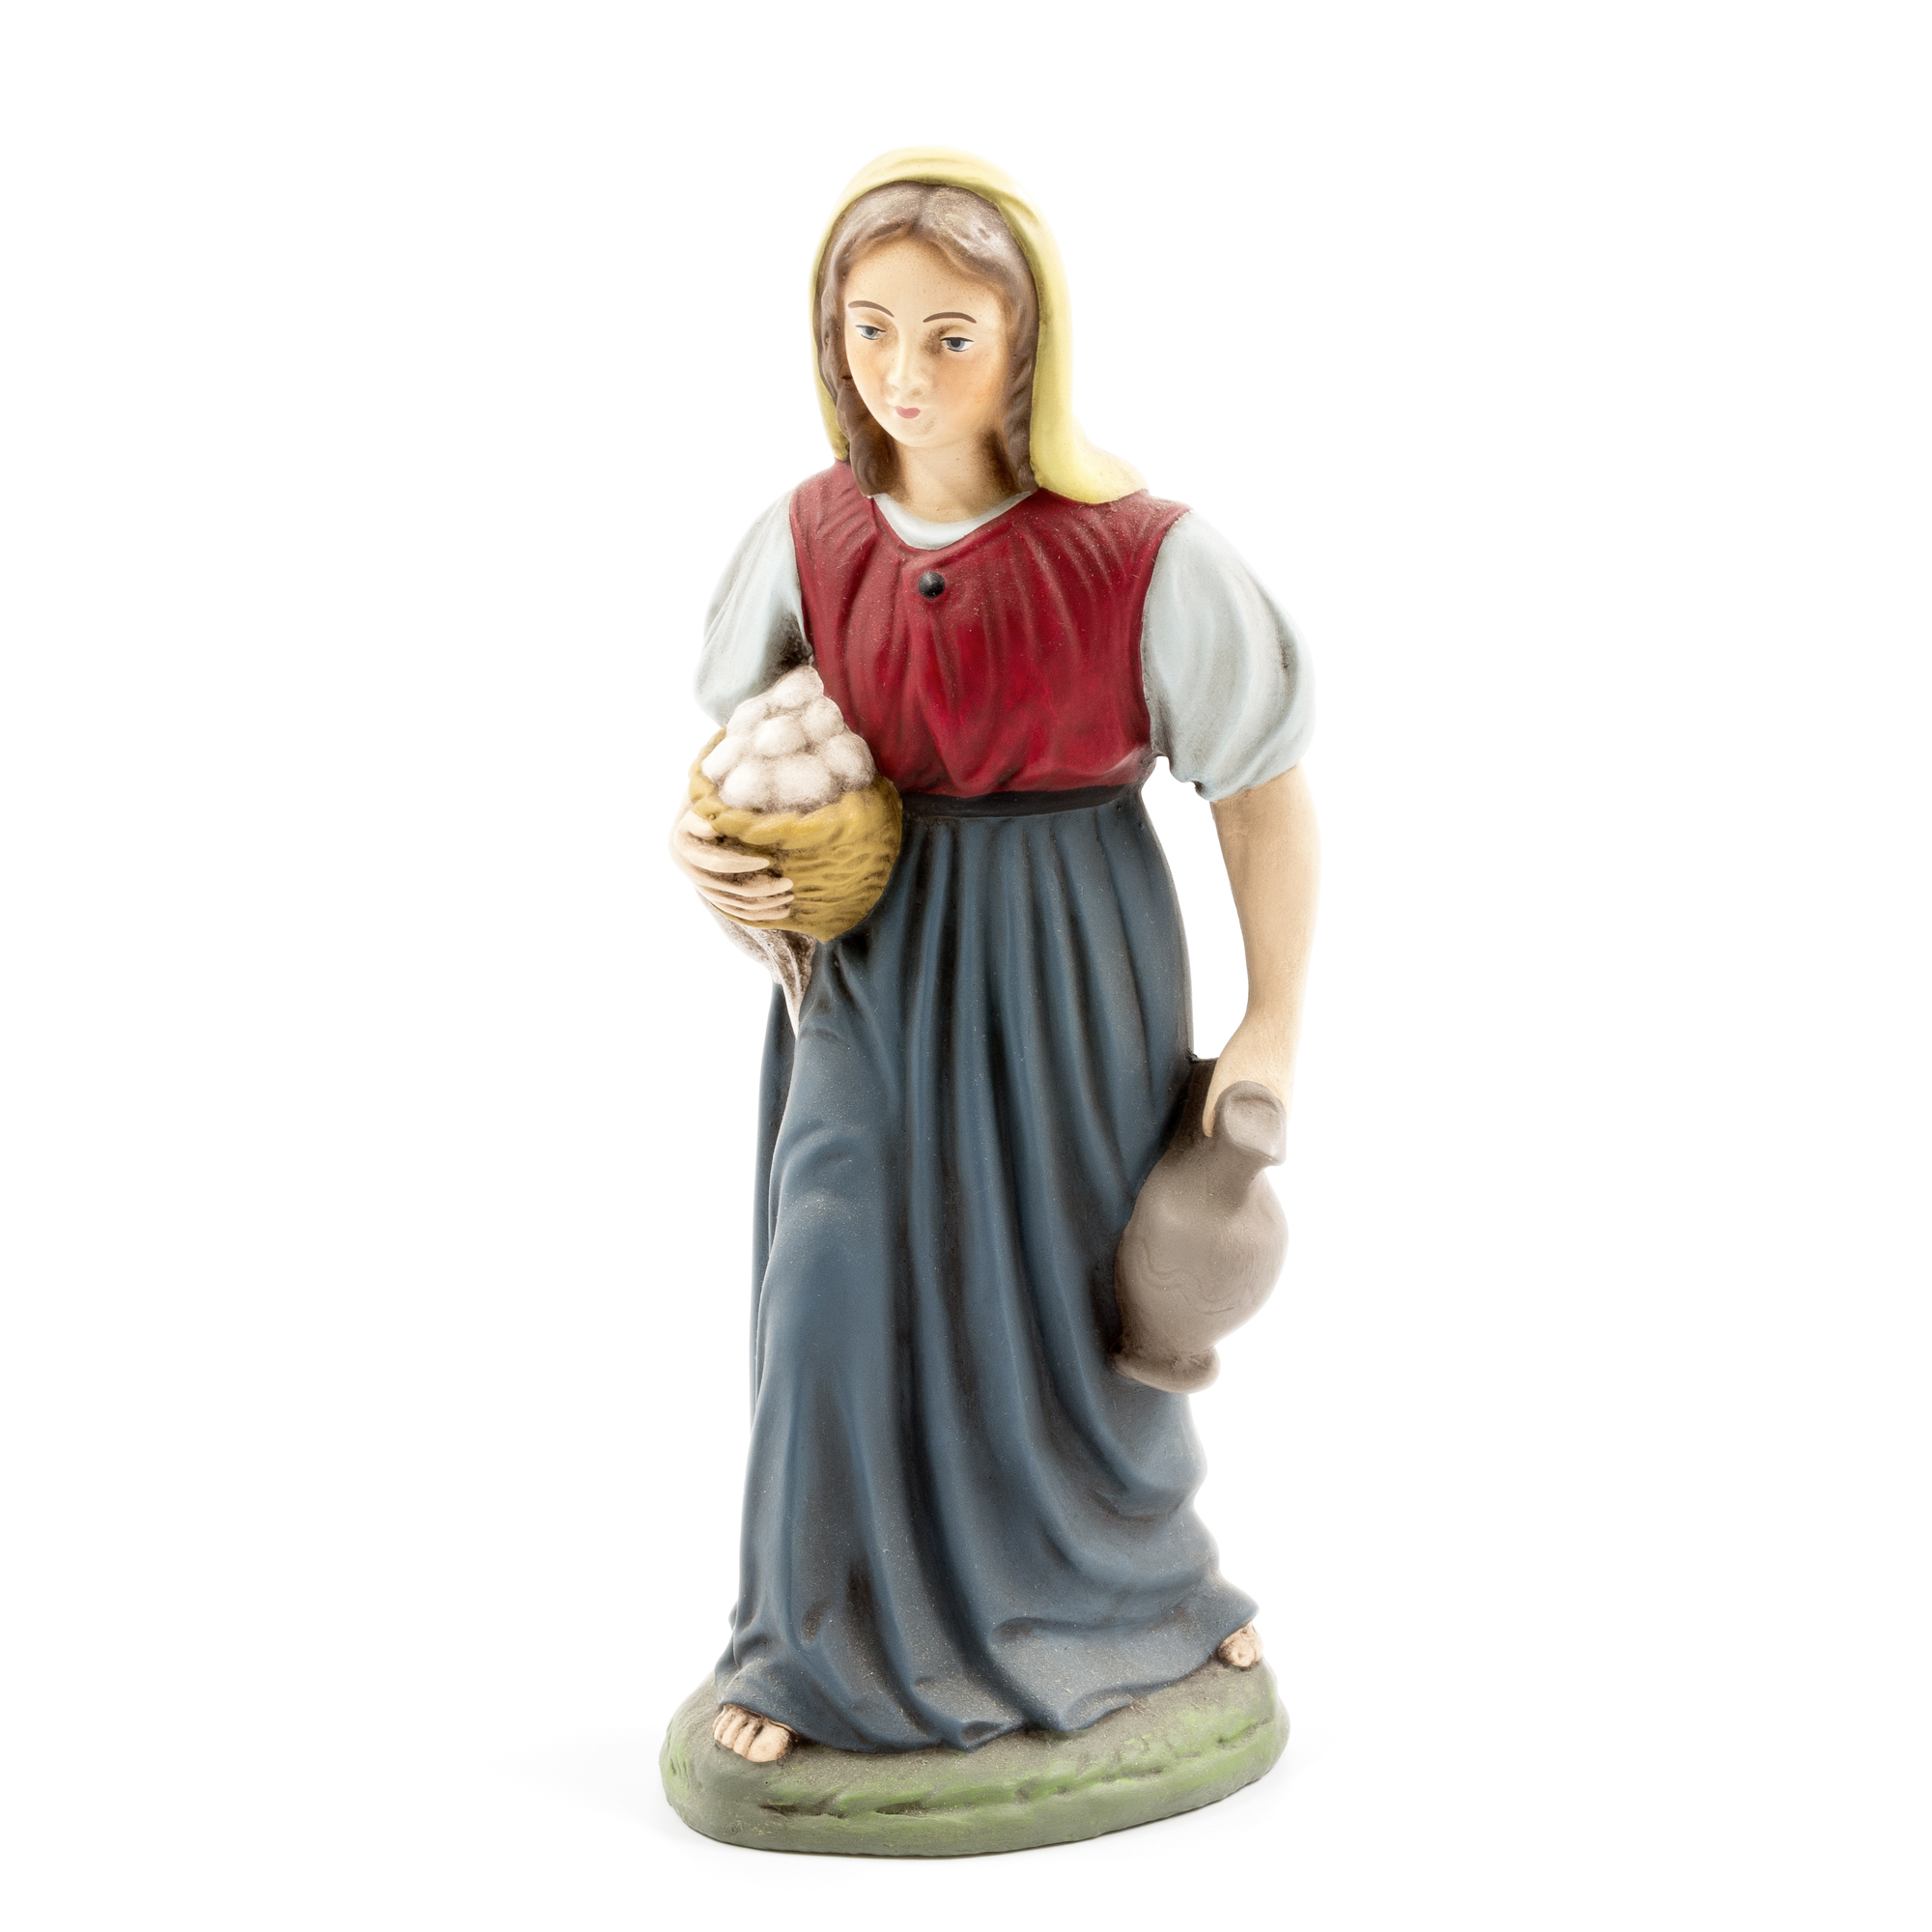 Shepherdess with egg basket, to 8.5 in. figures